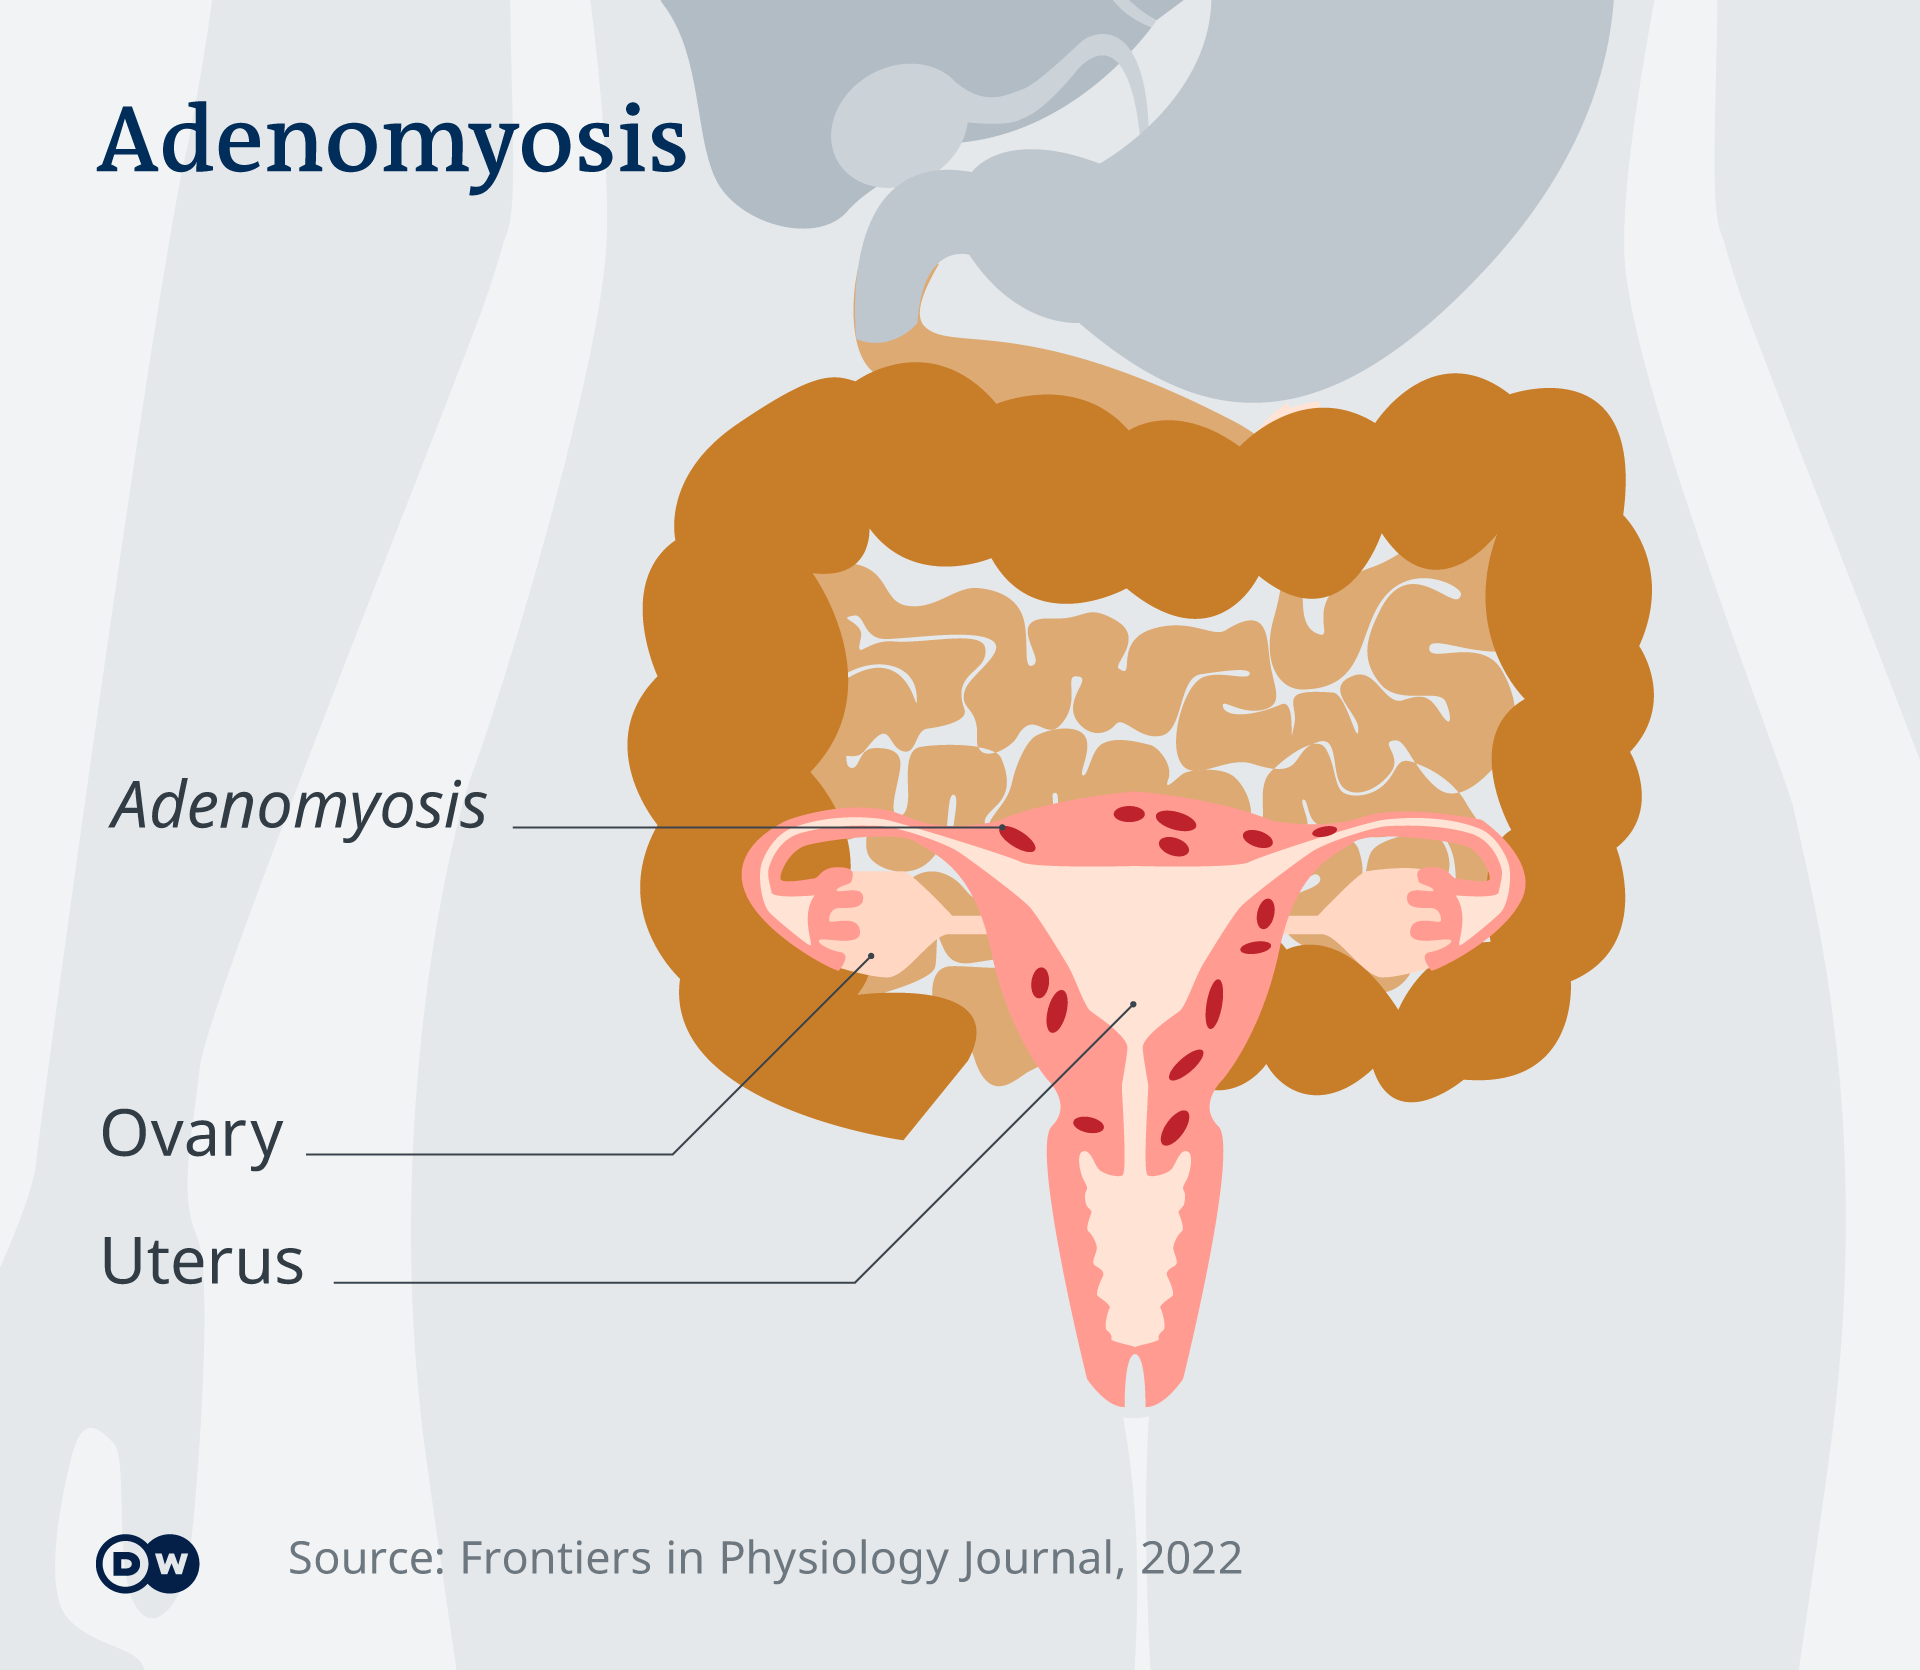 An infographic showing how adenomyosis presents in a female's ovaries and uterus